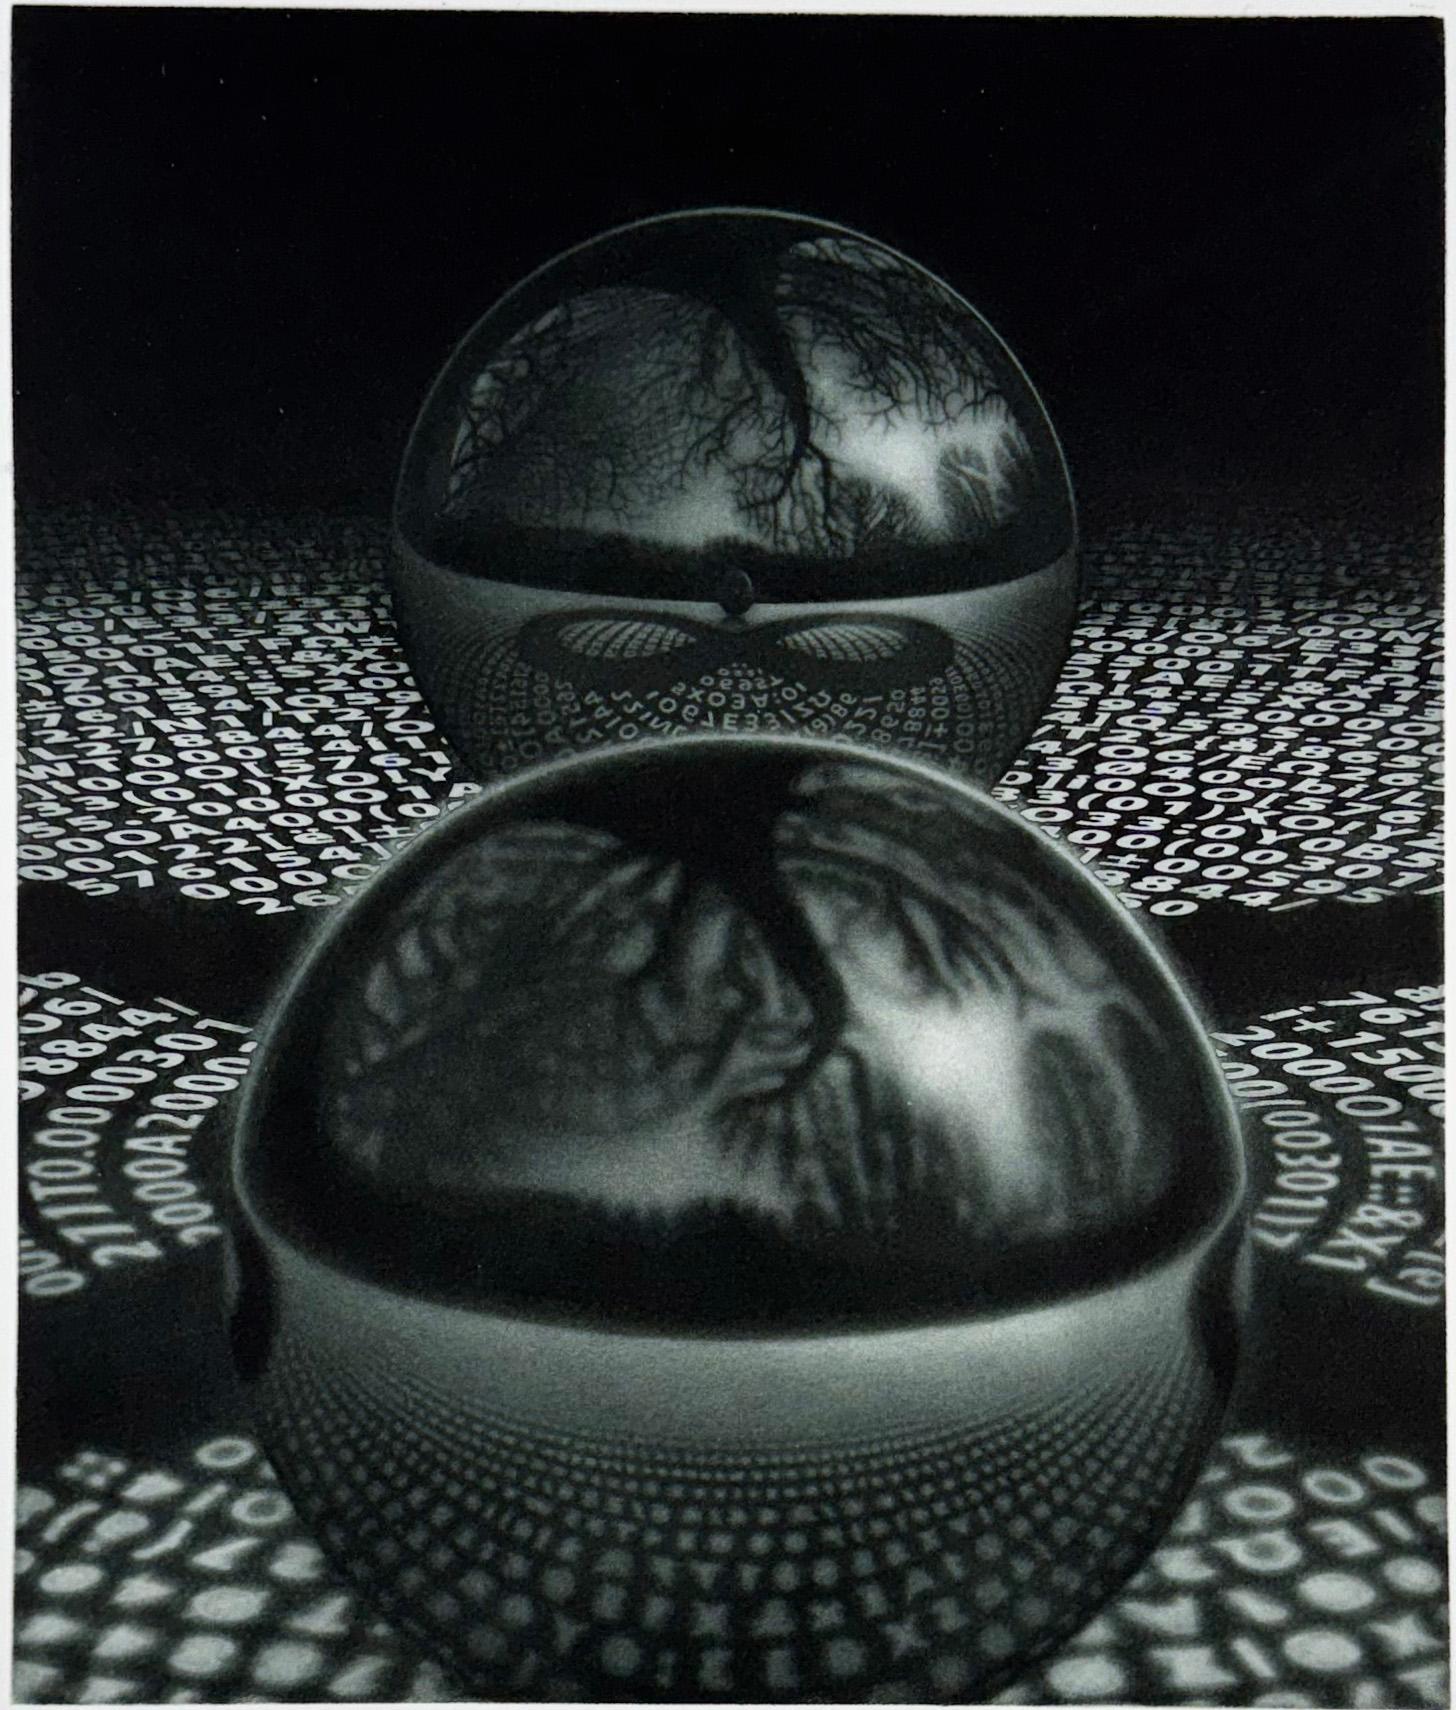 Medium: mezzotint with aquatint
Year: 2015
Edition: 35 copies, signed in pencil.
Image Size: 10.25 x 8.66 inches

The surreal illusions and reflections in Sietins prints often bring M.C. Escher to mind, but his prints have a distinctive feel all